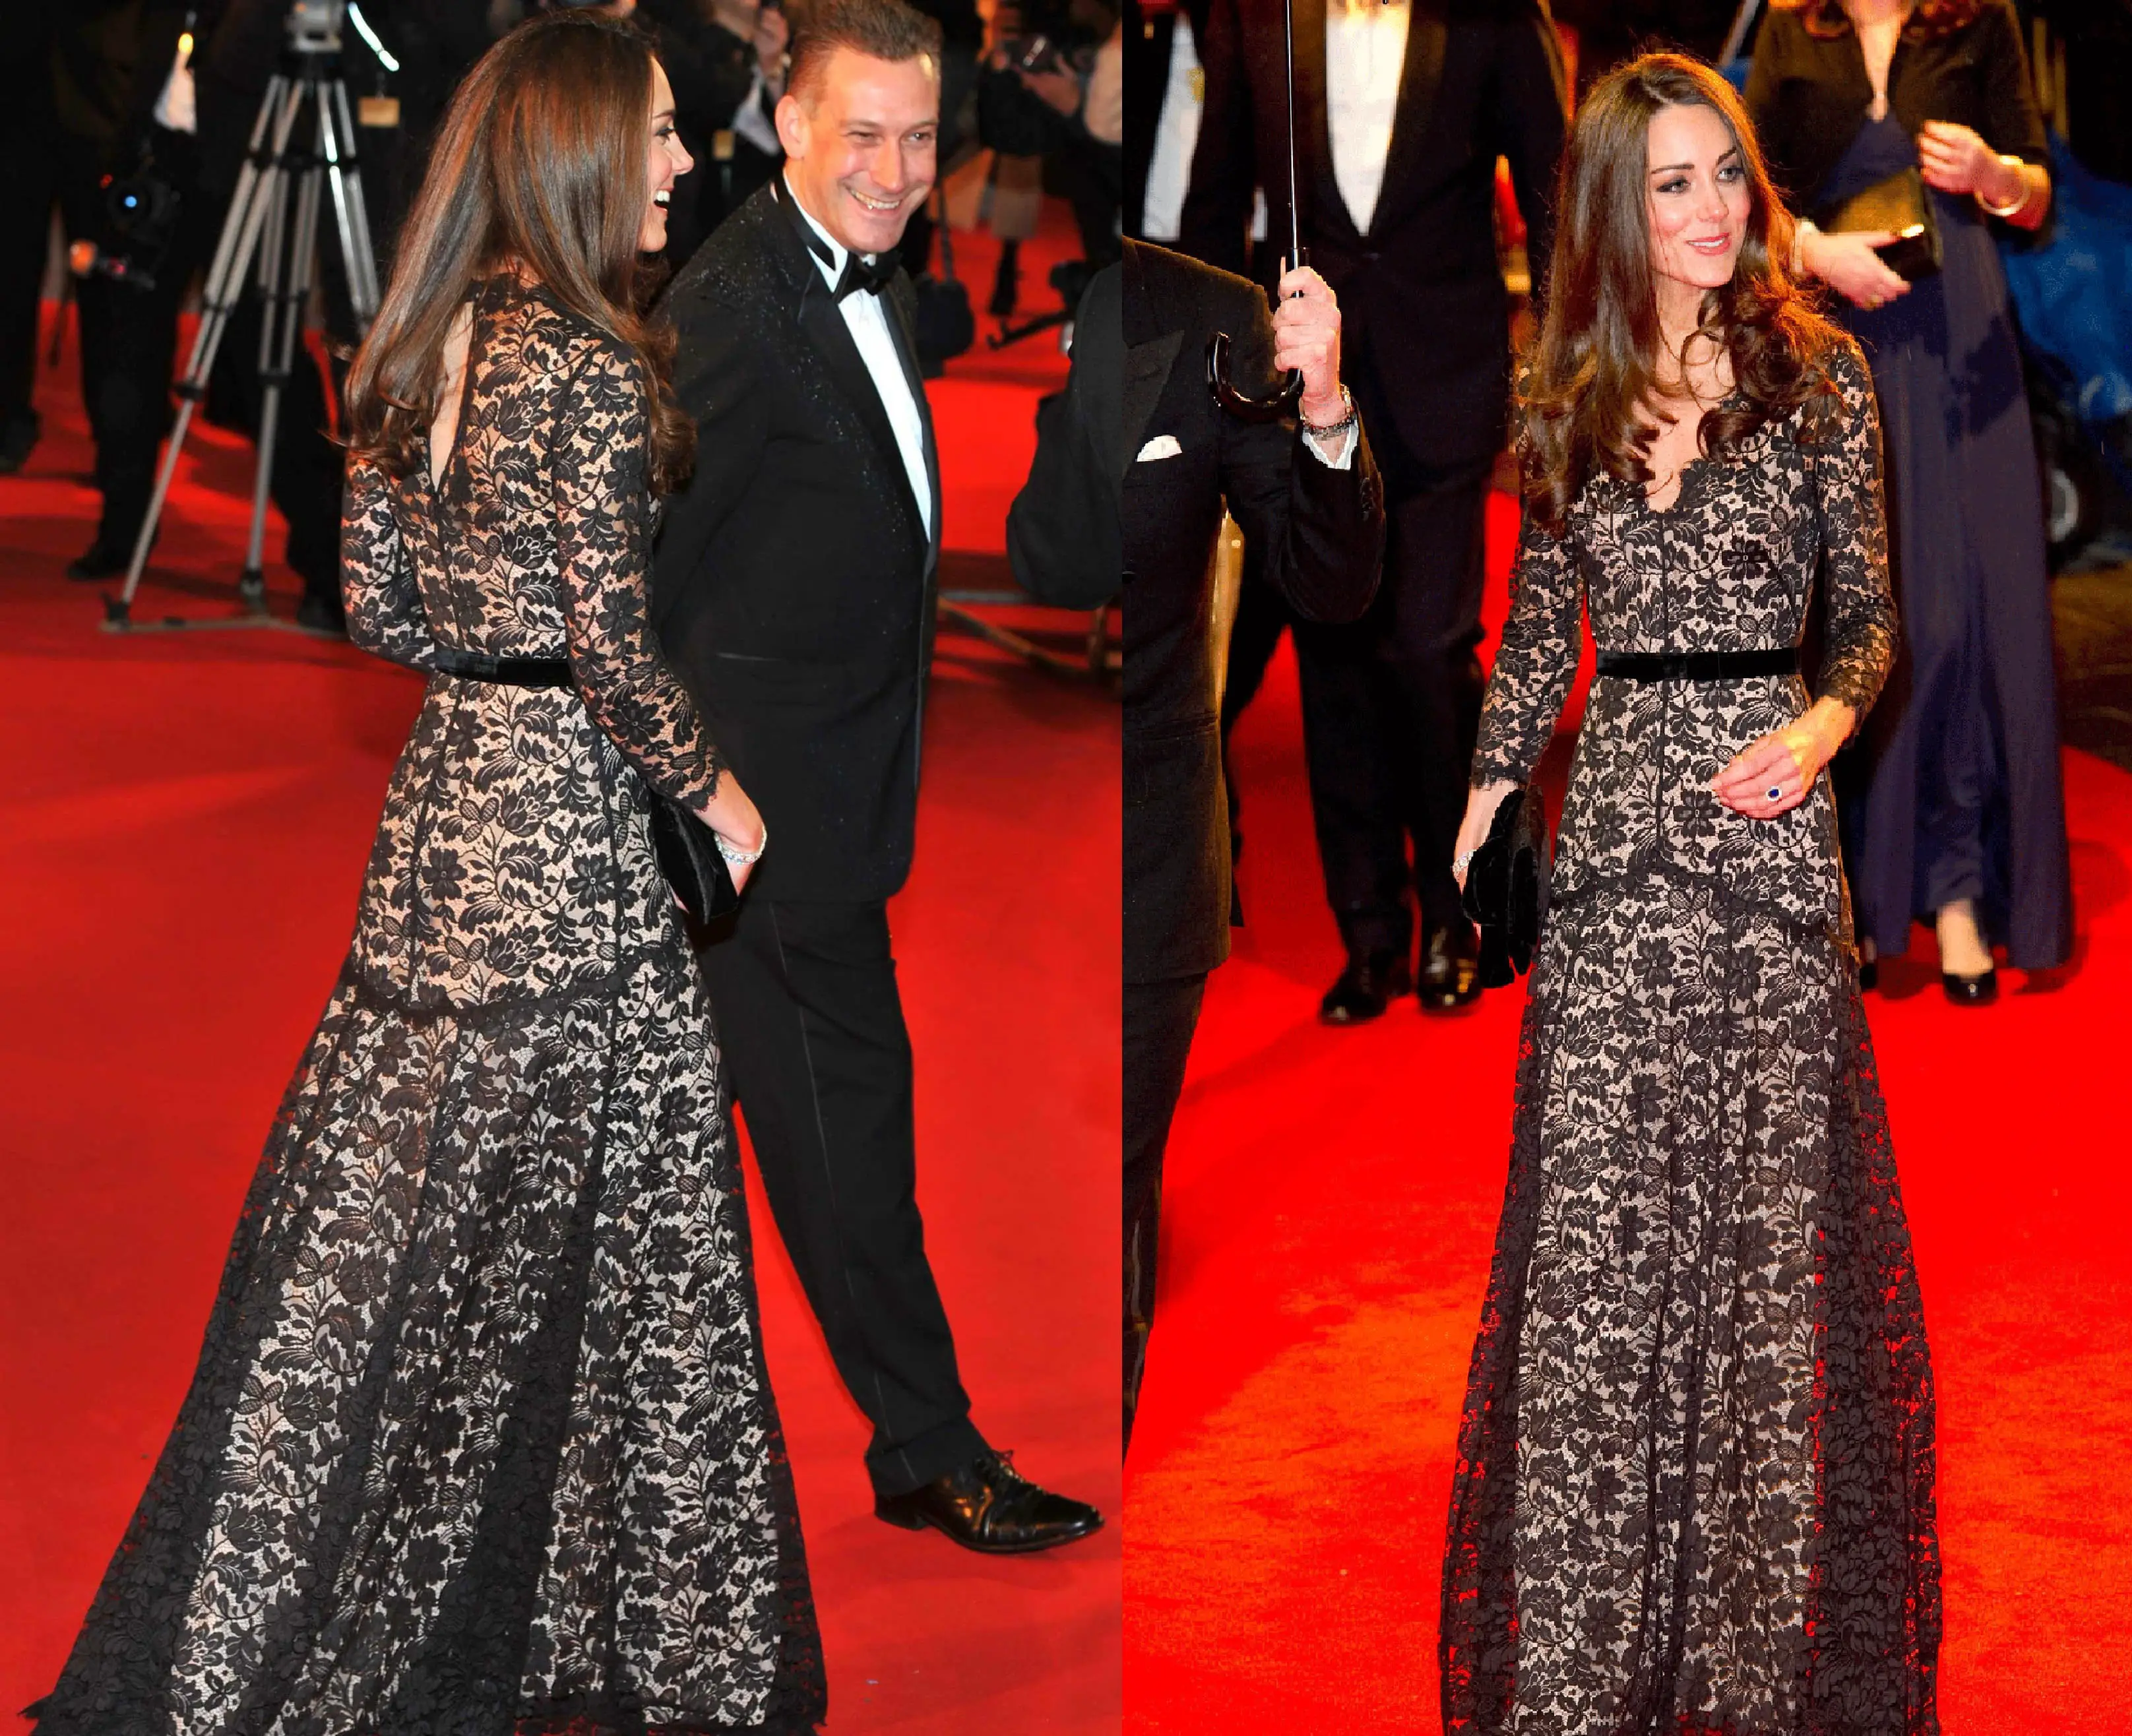 The Duchess of Cambridge at the War Horse Premiere in January 2012